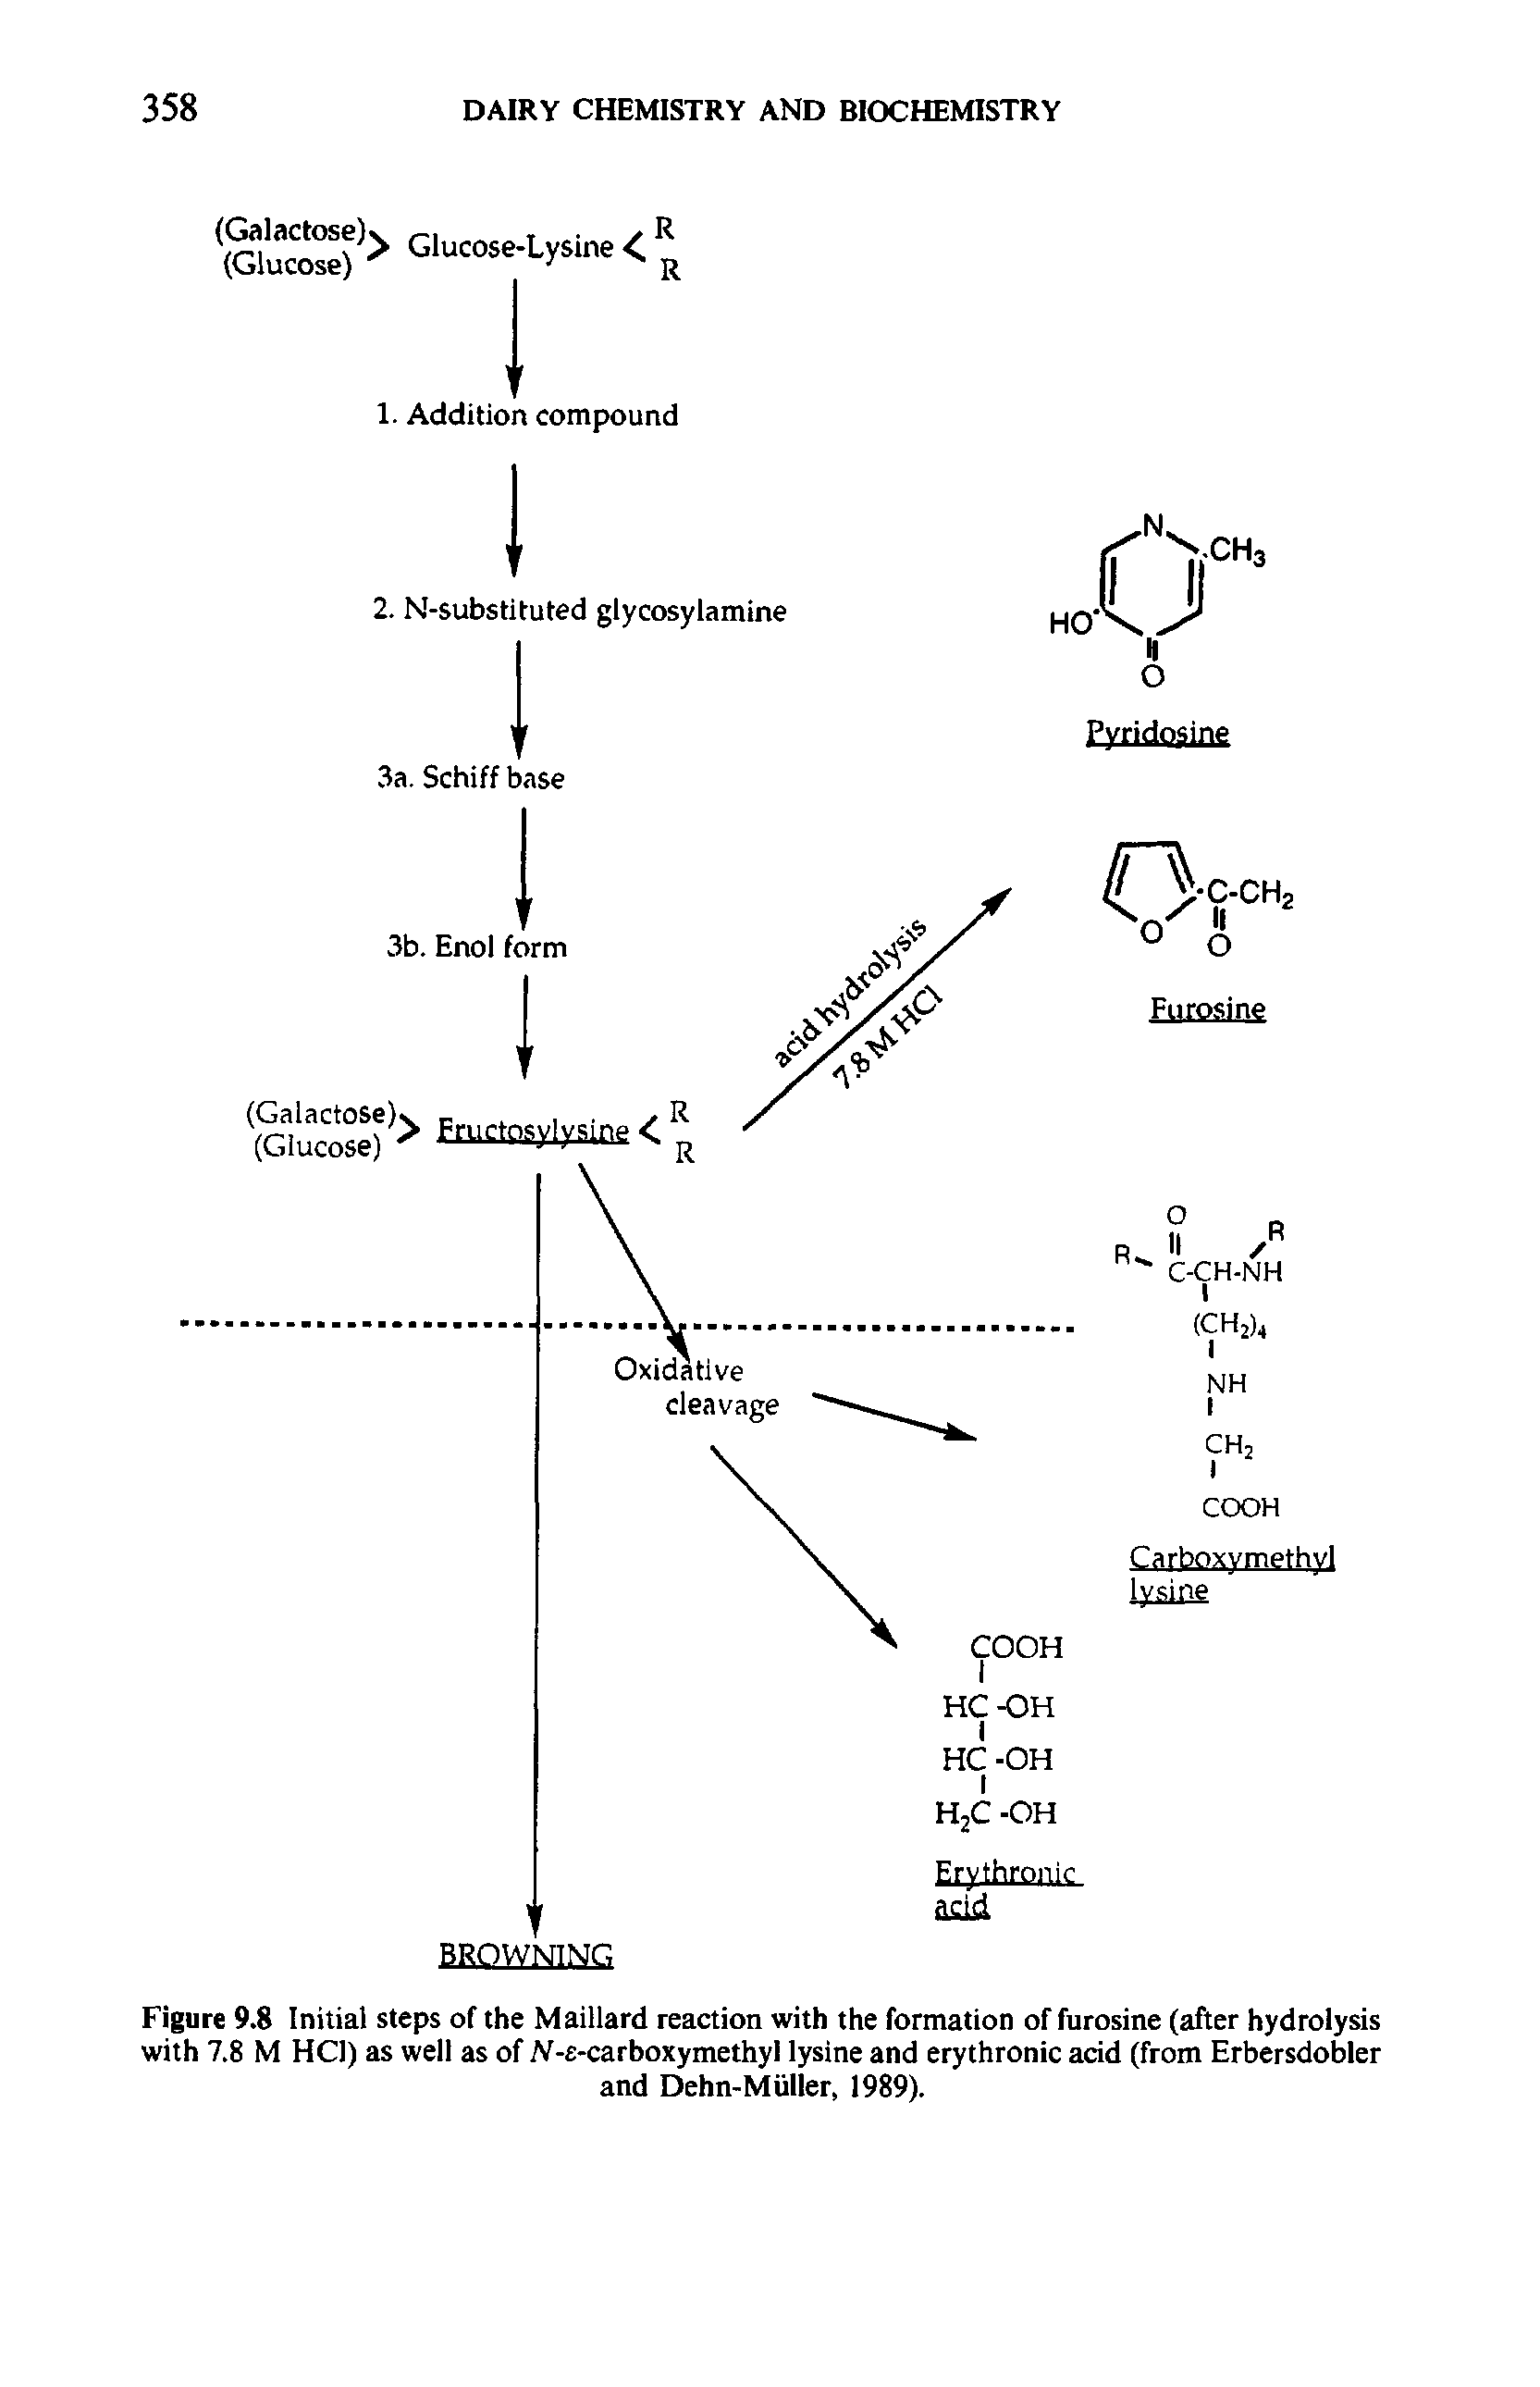 Figure 9.8 Initial steps of the Maillard reaction with the formation of furosine (after hydrolysis with 7.8 M HCi) as well as of. Y-s-carboxymethyl lysine and erythronic acid (from Erbersdobler...